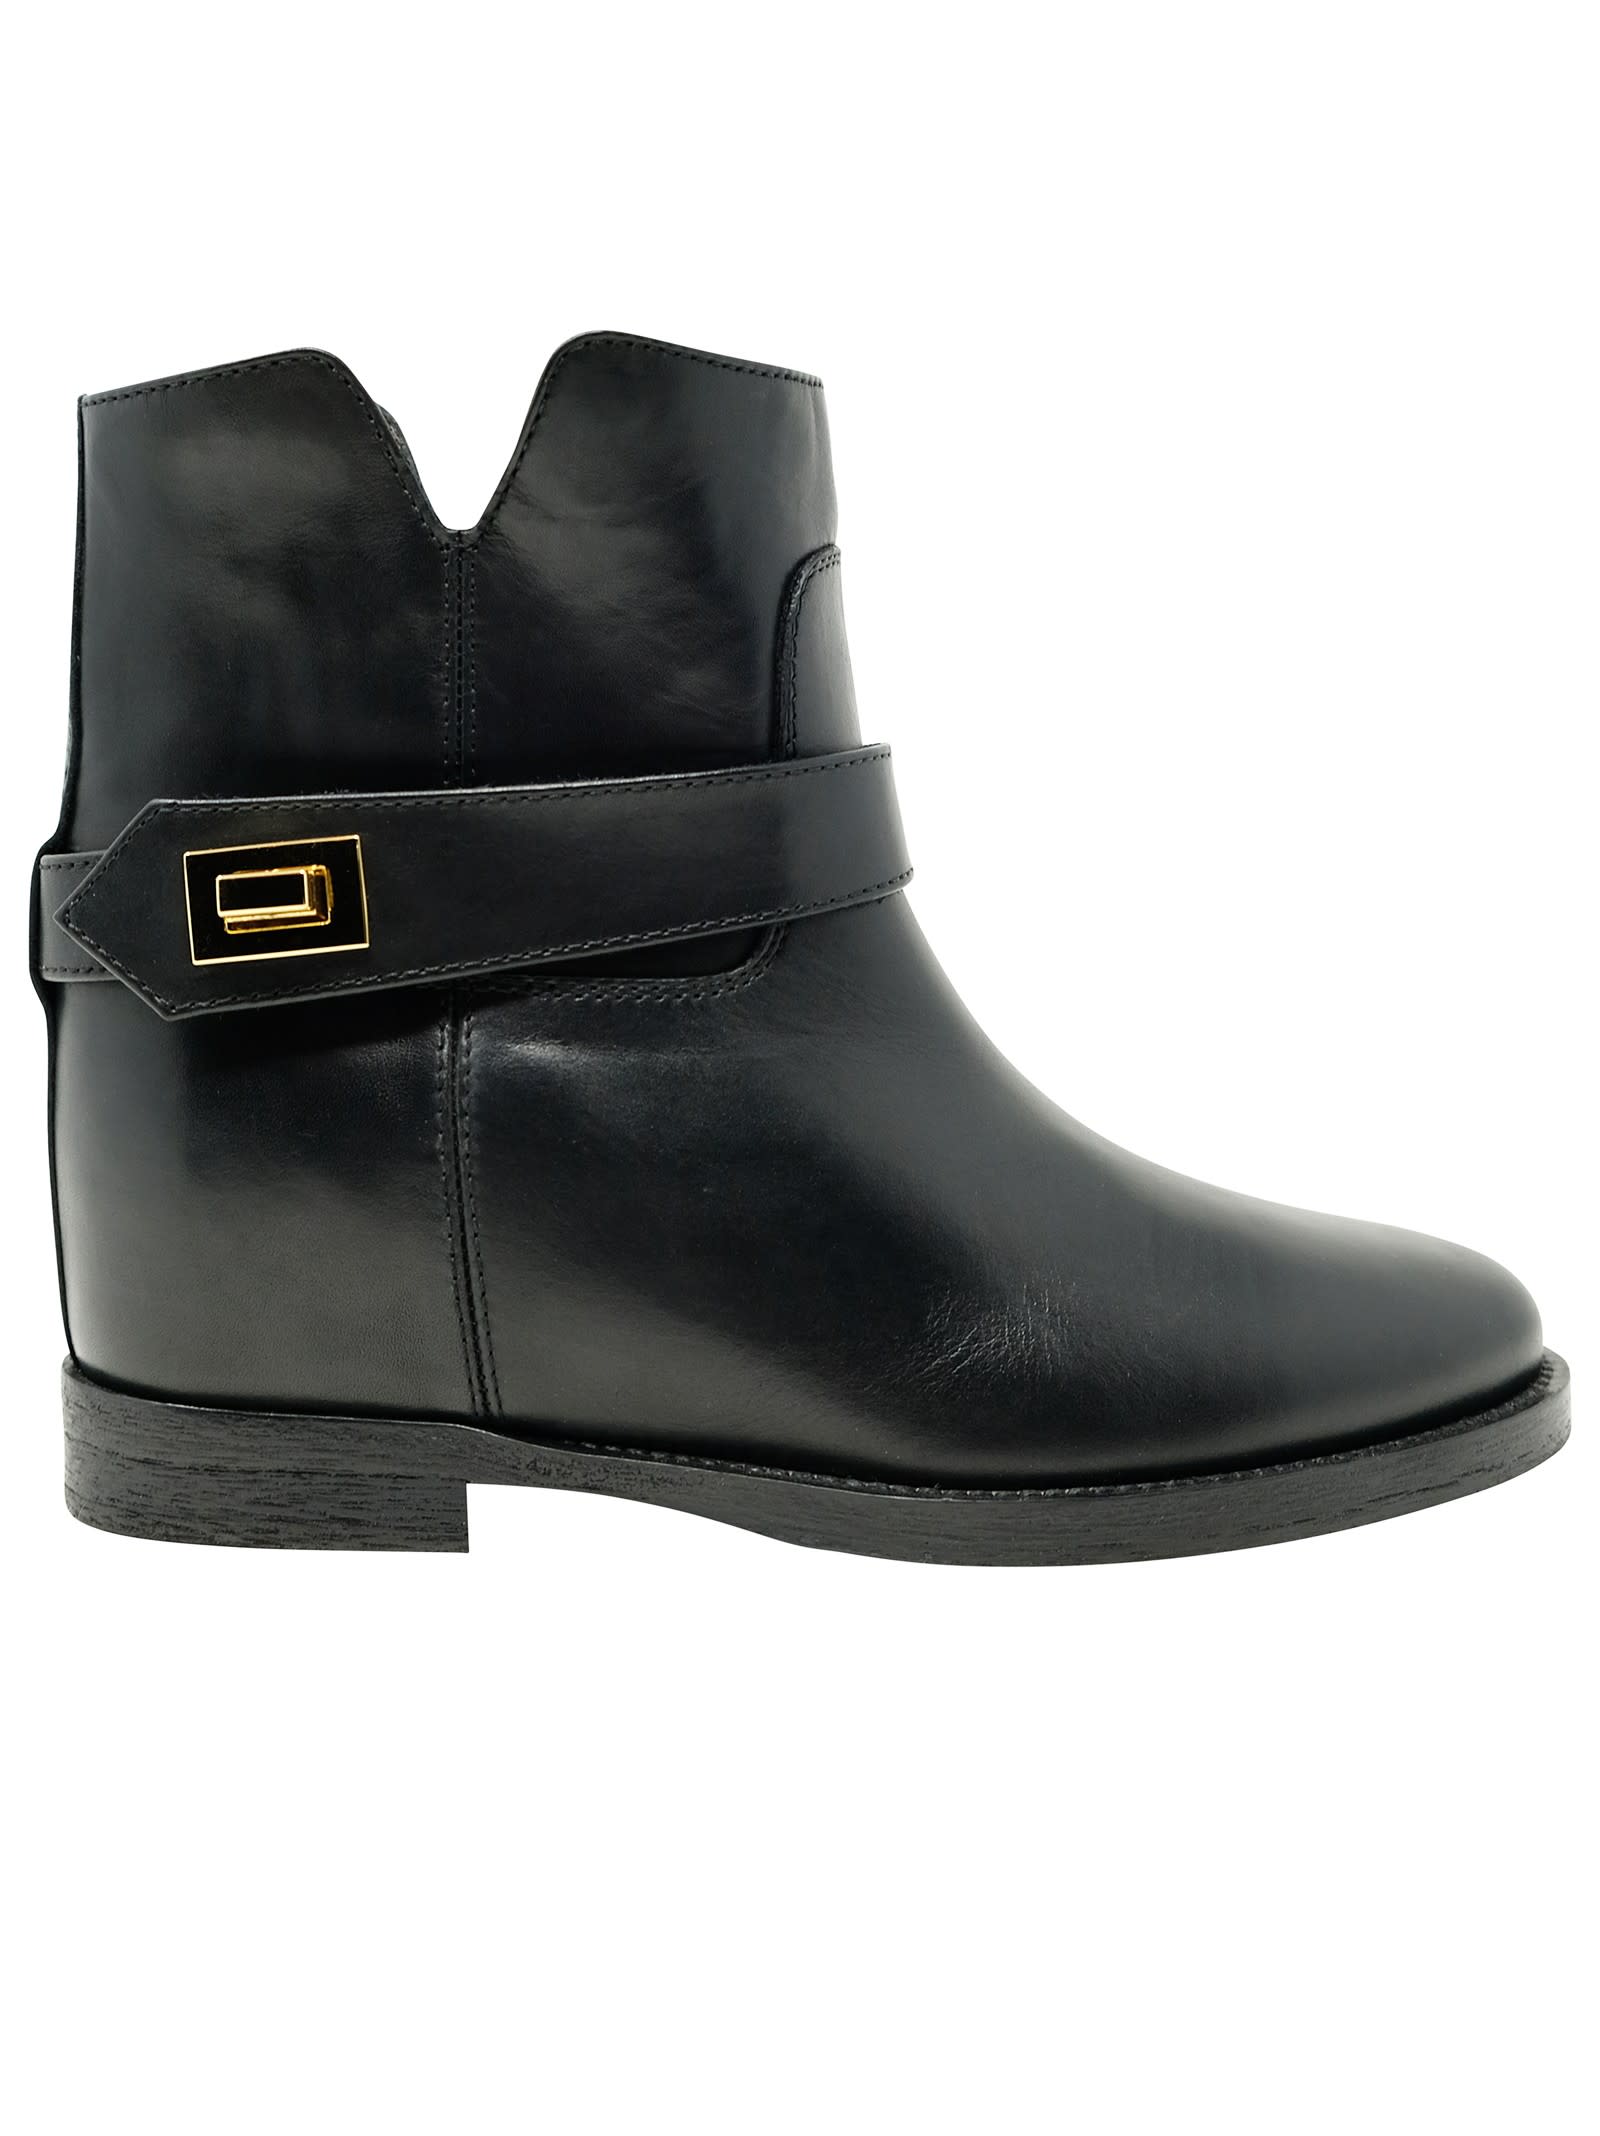 Via Roma 15 Black Leather Whit Gold Padlock Ankle Boots